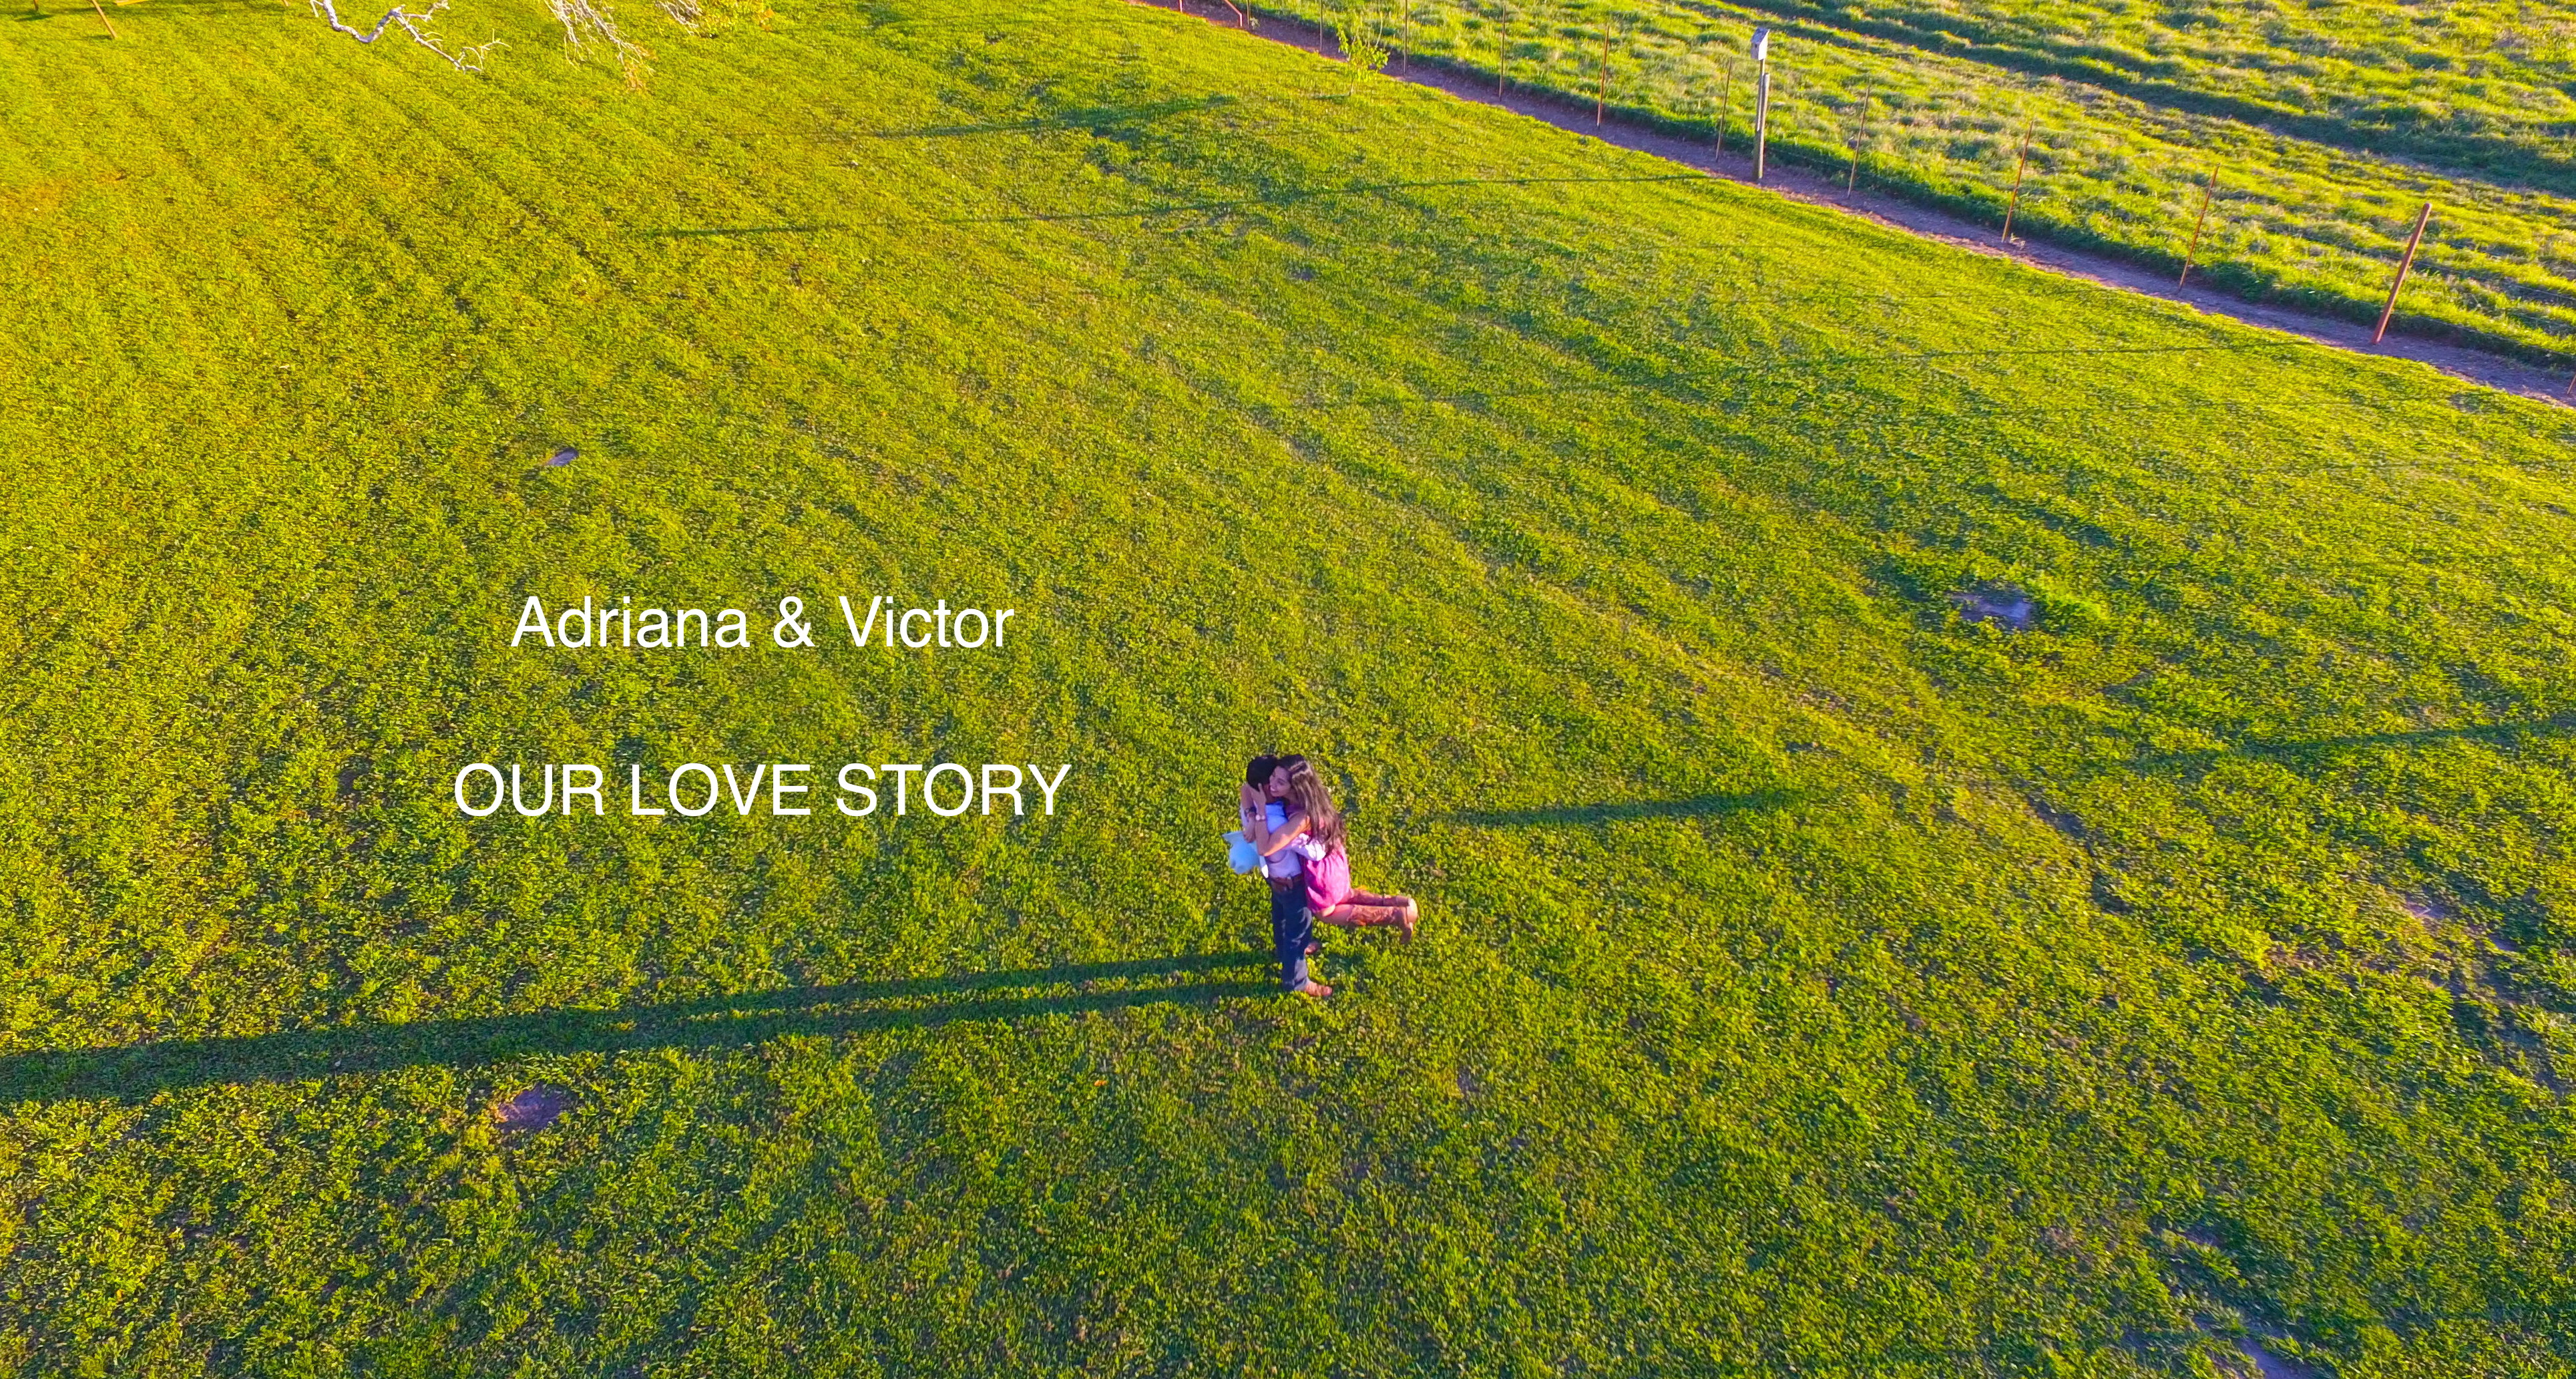 Adriana & Victor: Our Love Story